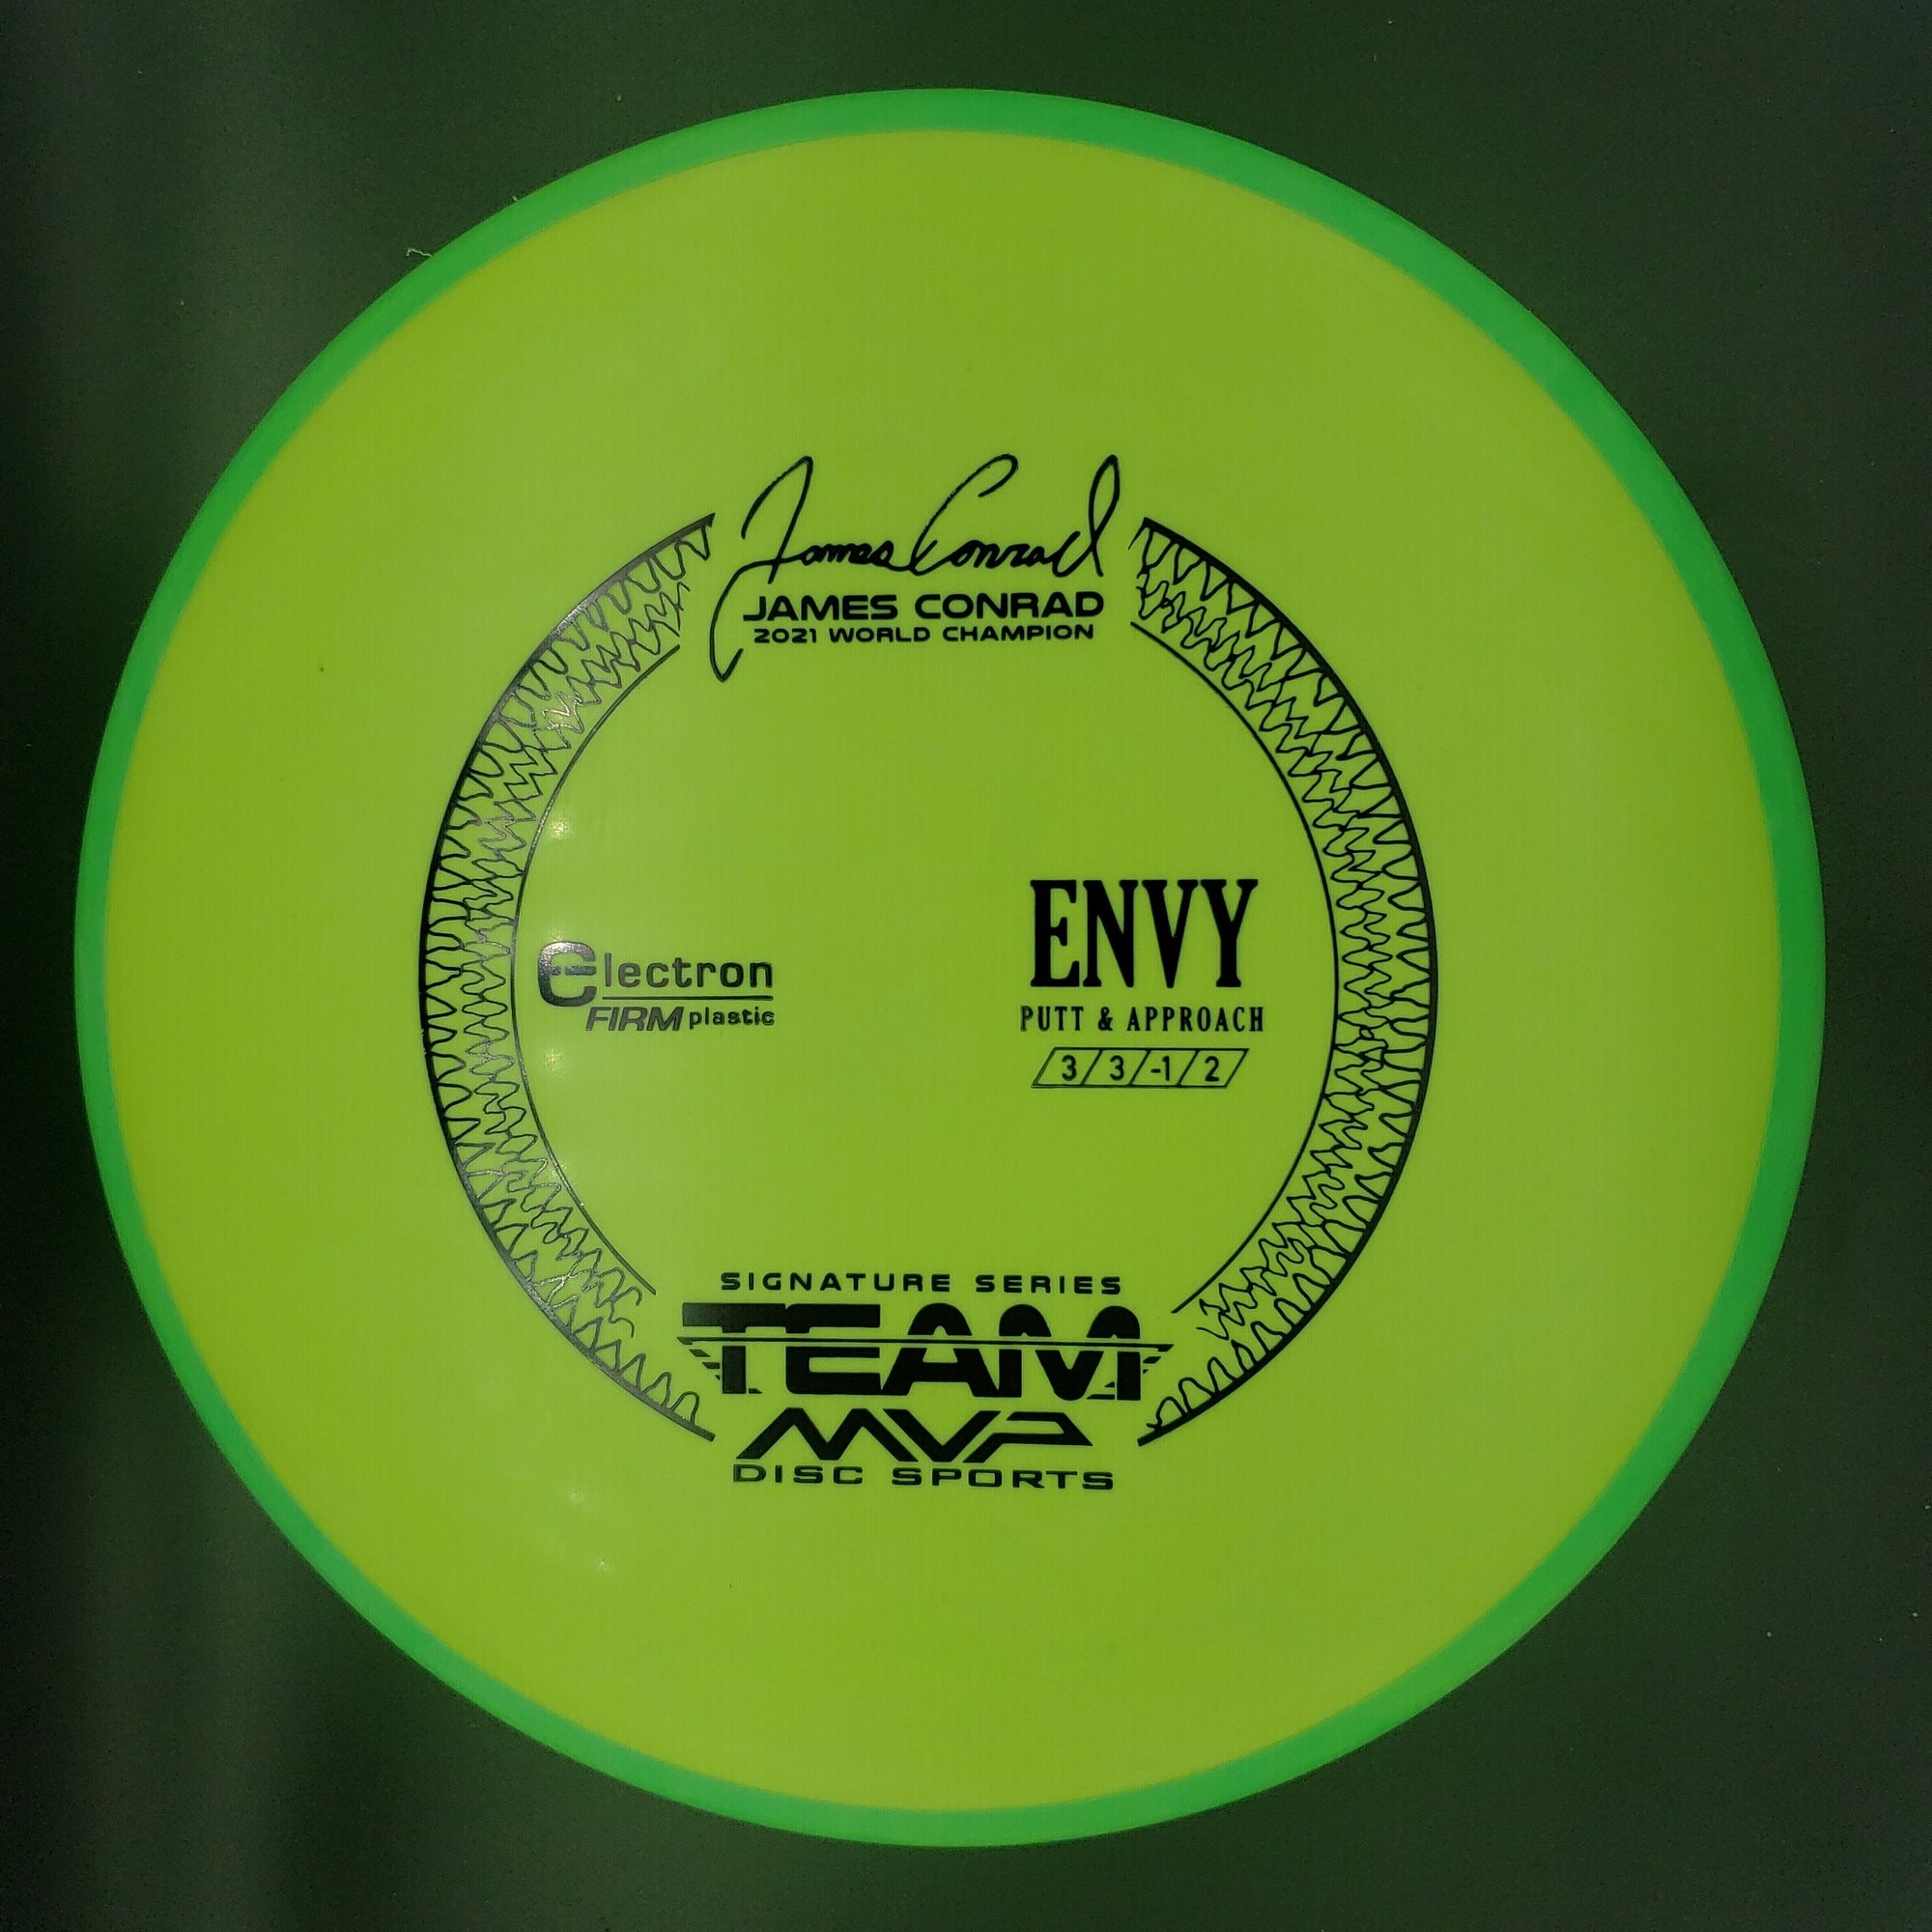 MVP Putter Green Rim Yellow/Green Plate 172g Products James Conrad Signature Envy, Electron Firm